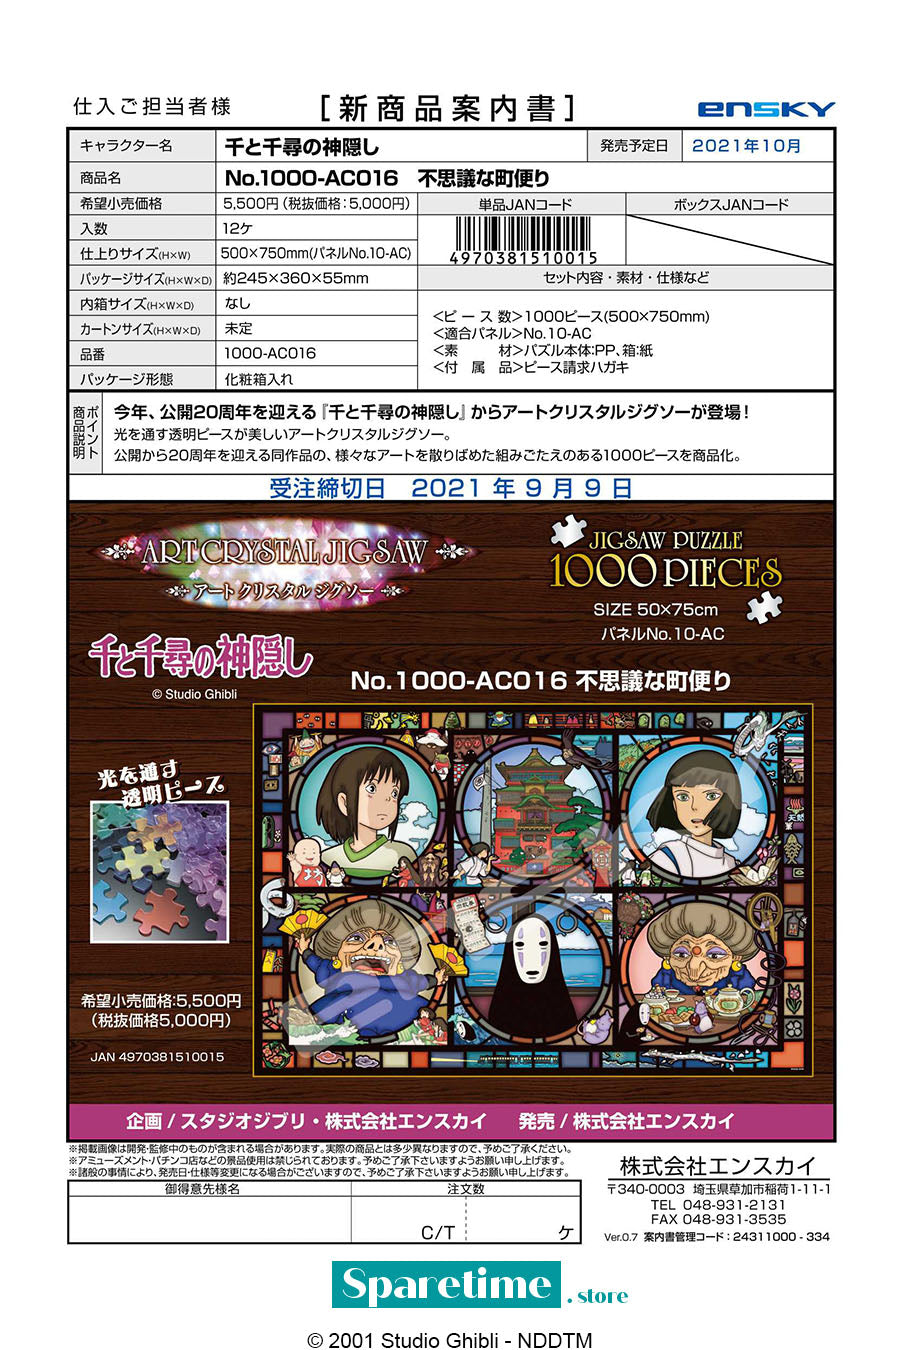 News from a Mysterious Town Spirited Away Artcrystal Puzzle "Spirited Away", Ensky Puzzle 1000-AC016